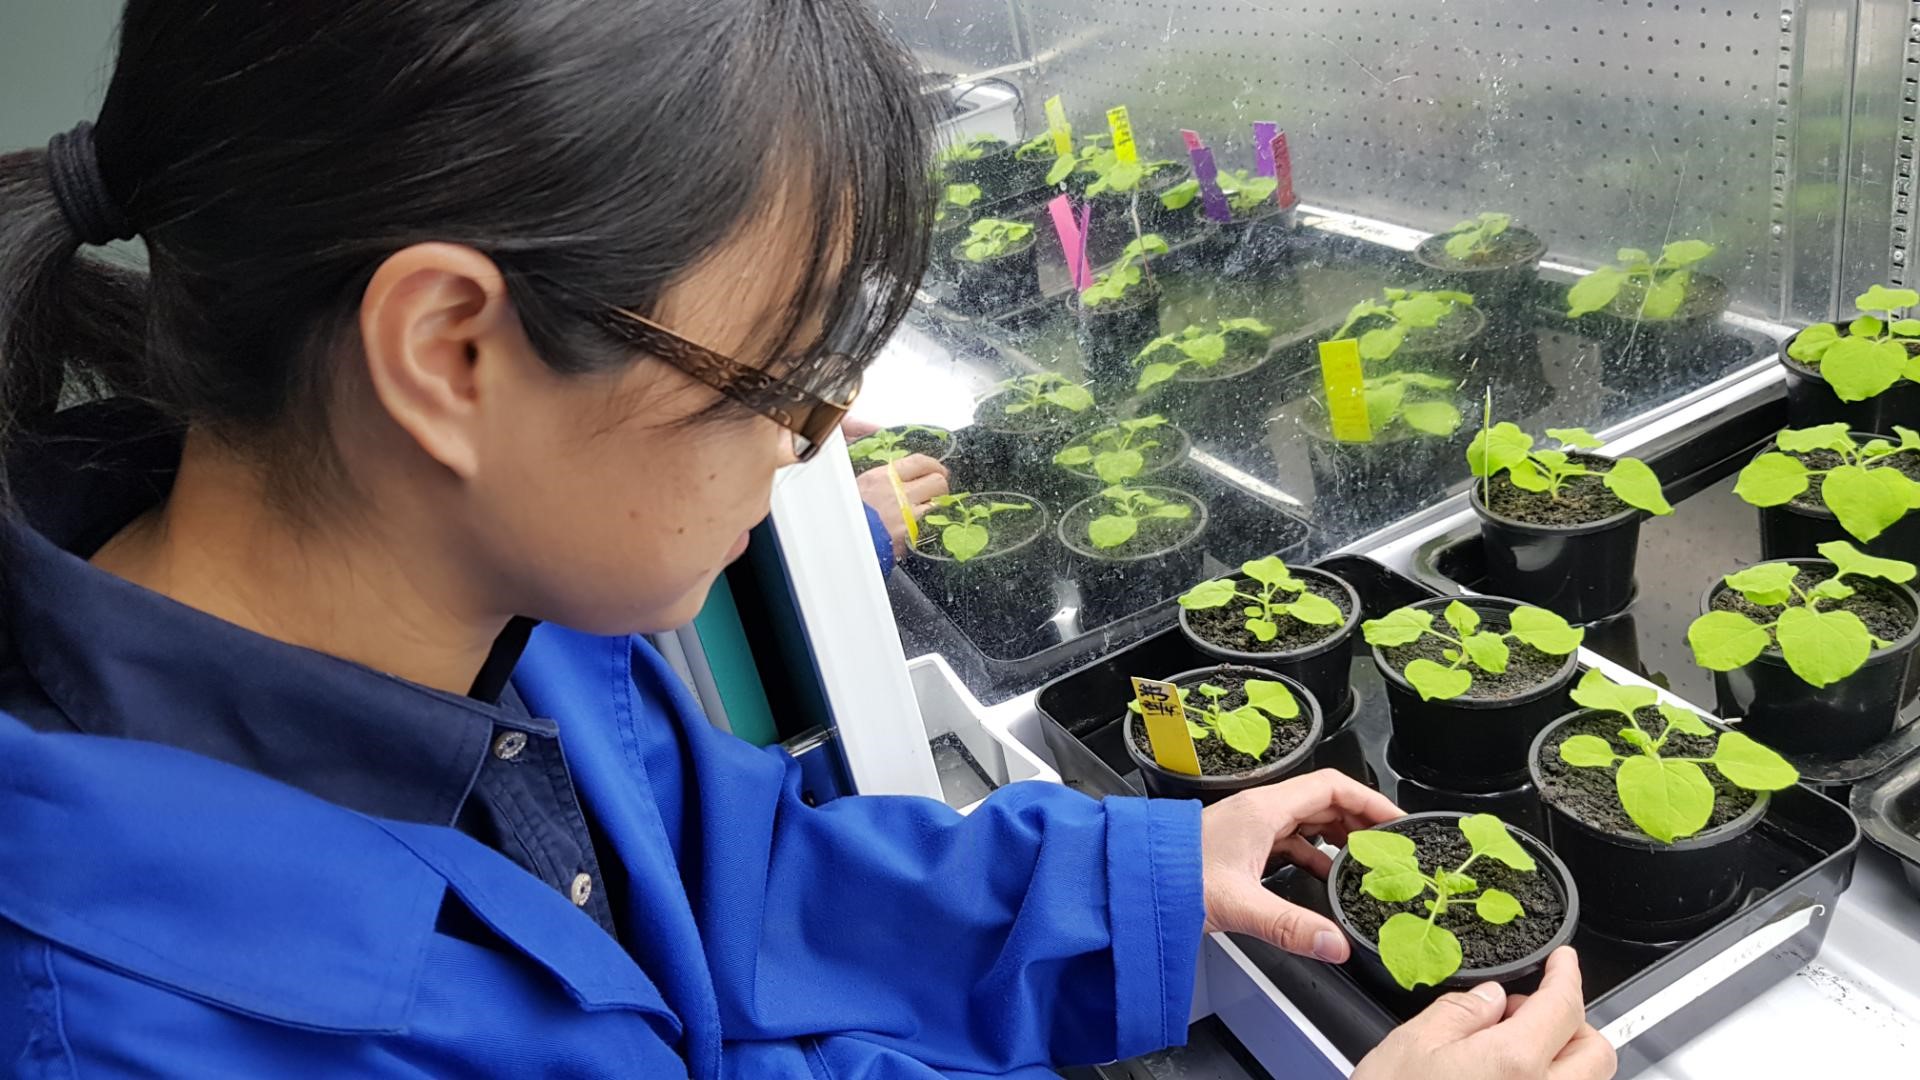 Dr Xiaoqing Li in a lab coat working with benth plants in little pots